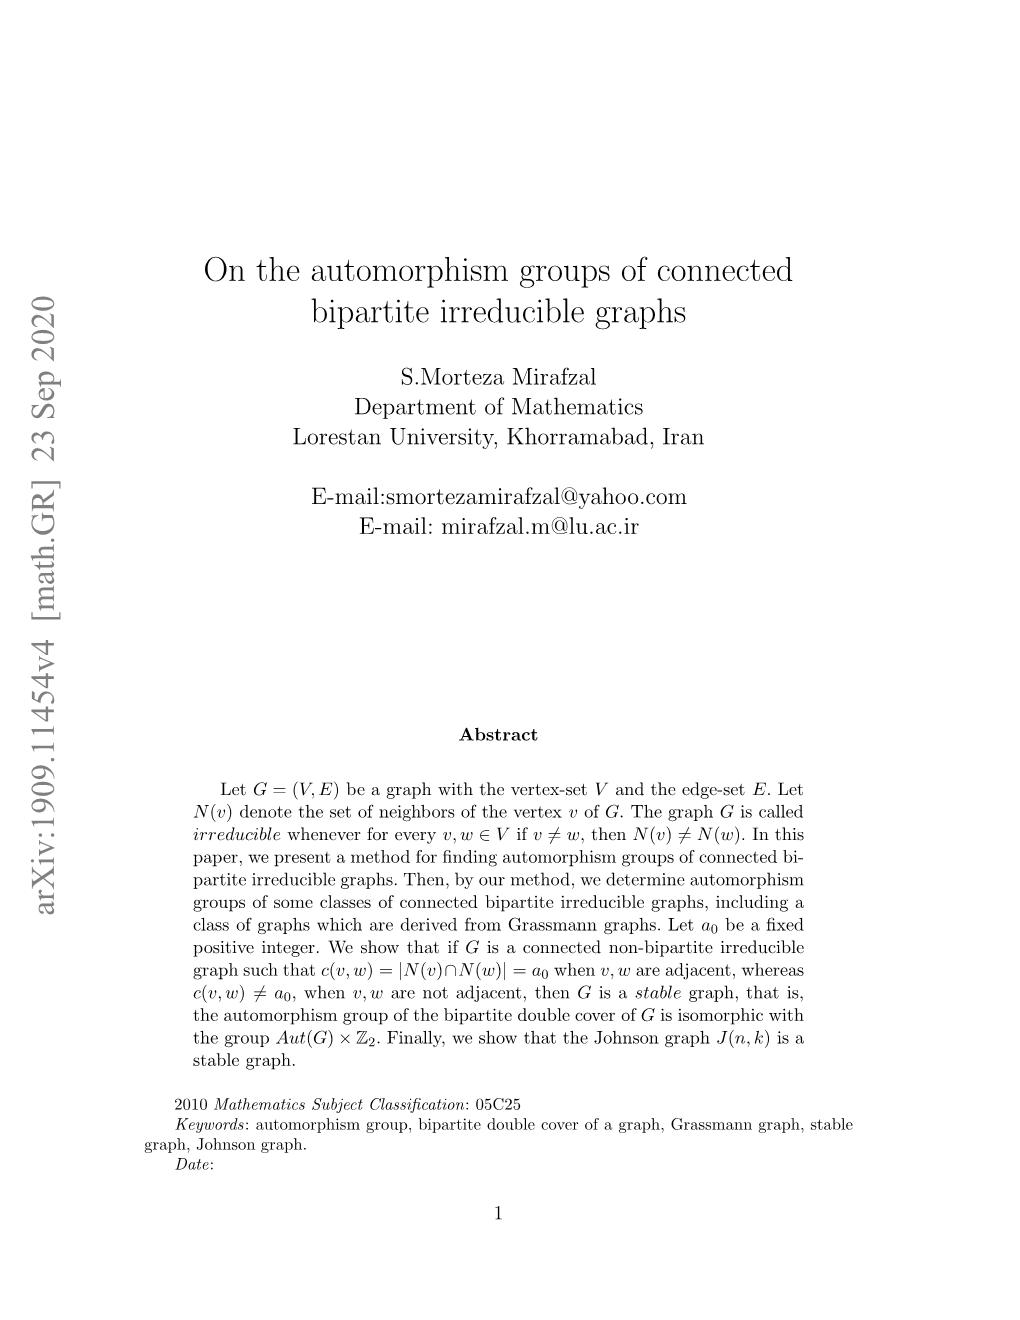 On the Automorphism Groups of Connected Bipartite Irreducible Graphs 3 the Automorphism Group of the Graph G